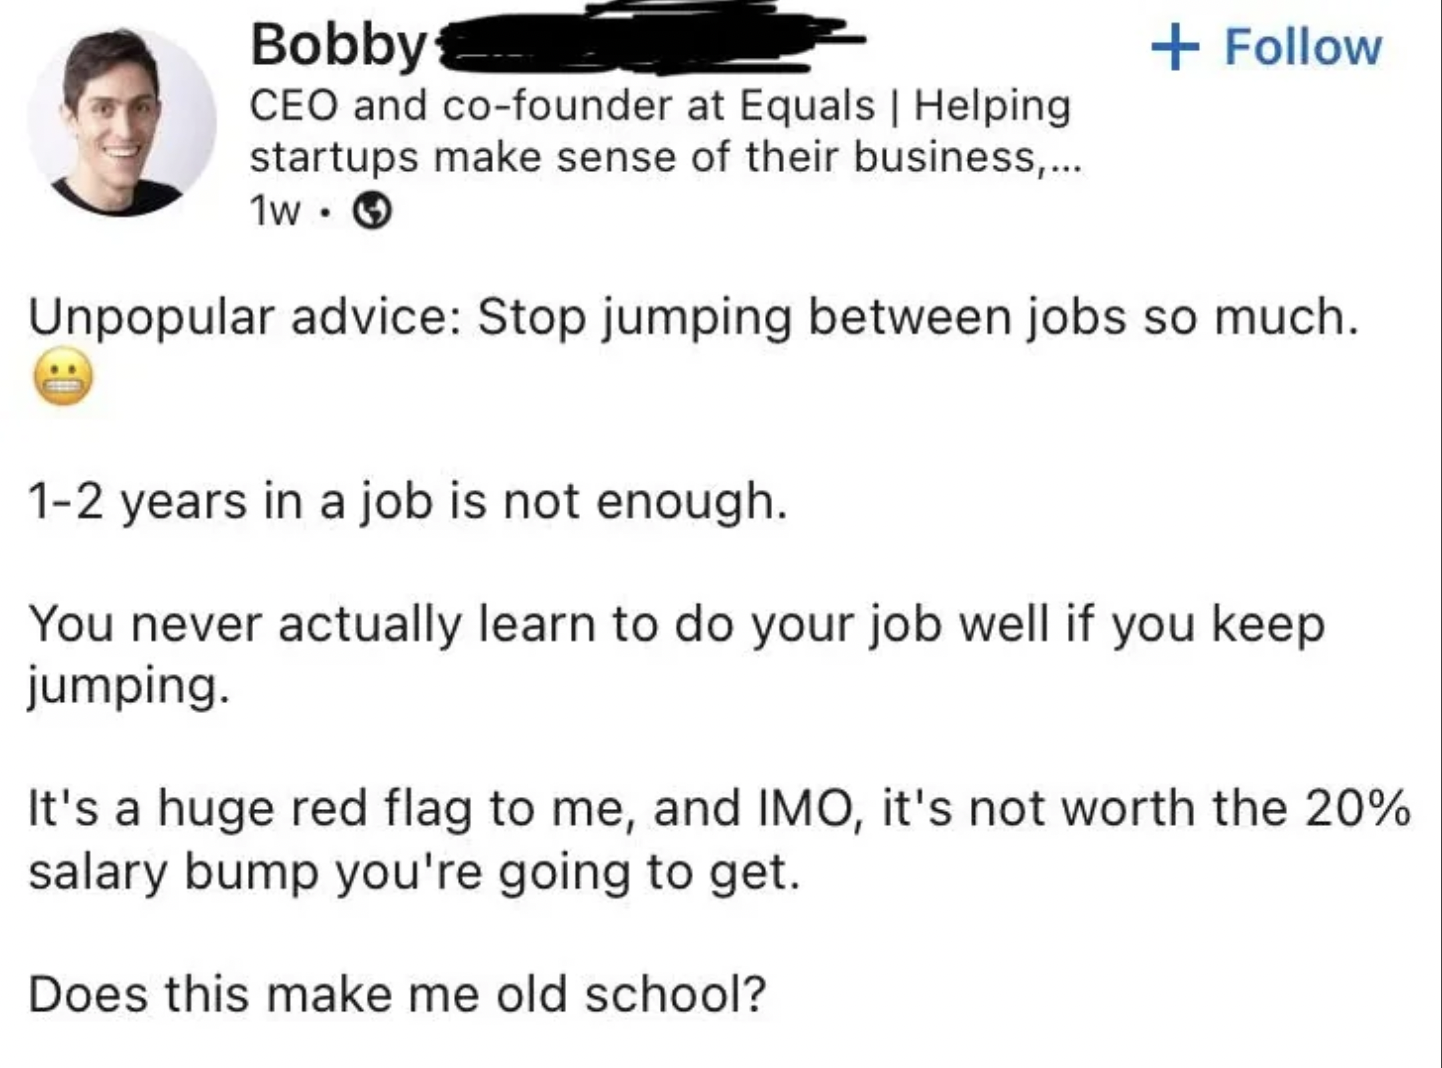 screenshot - Bobby Ceo and cofounder at Equals | Helping startups make sense of their business,... 1w Unpopular advice Stop jumping between jobs so much. 12 years in a job is not enough. You never actually learn to do your job well if you keep jumping. It